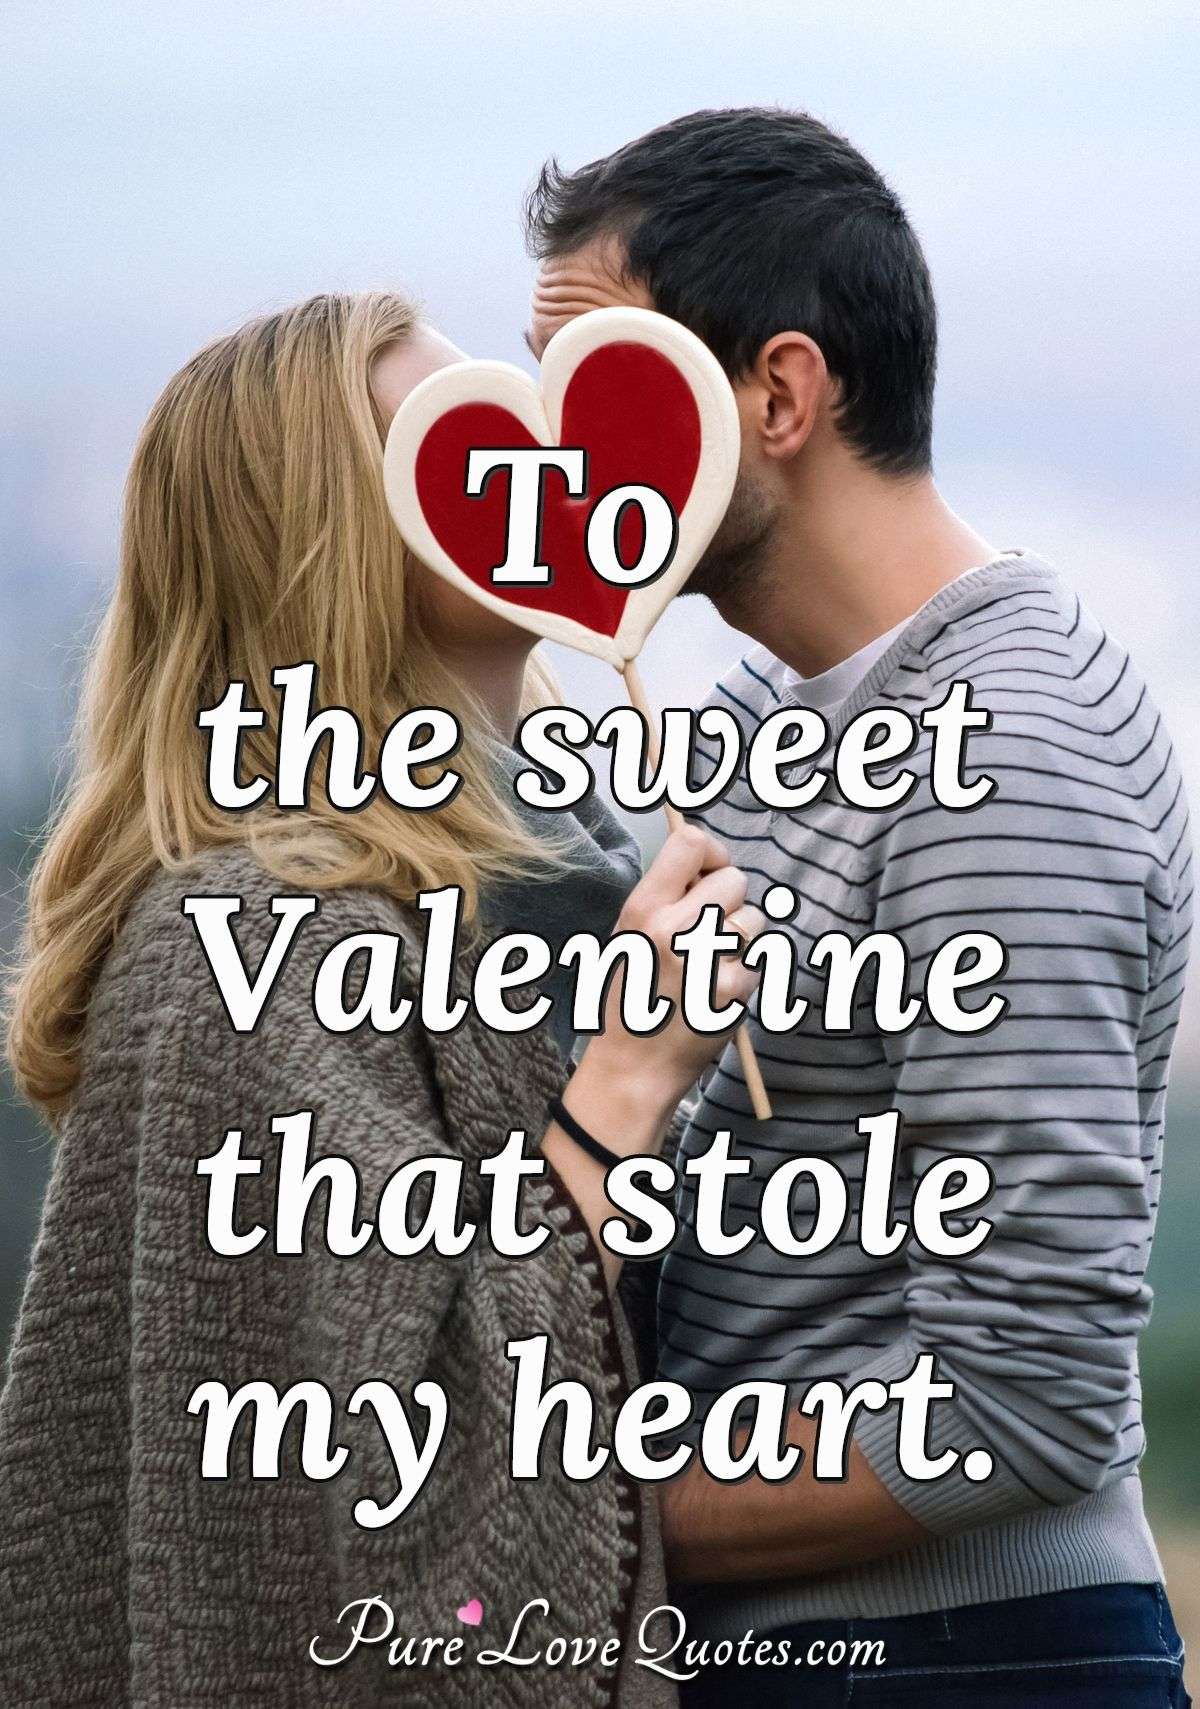 To the sweet Valentine that stole my heart. - Anonymous